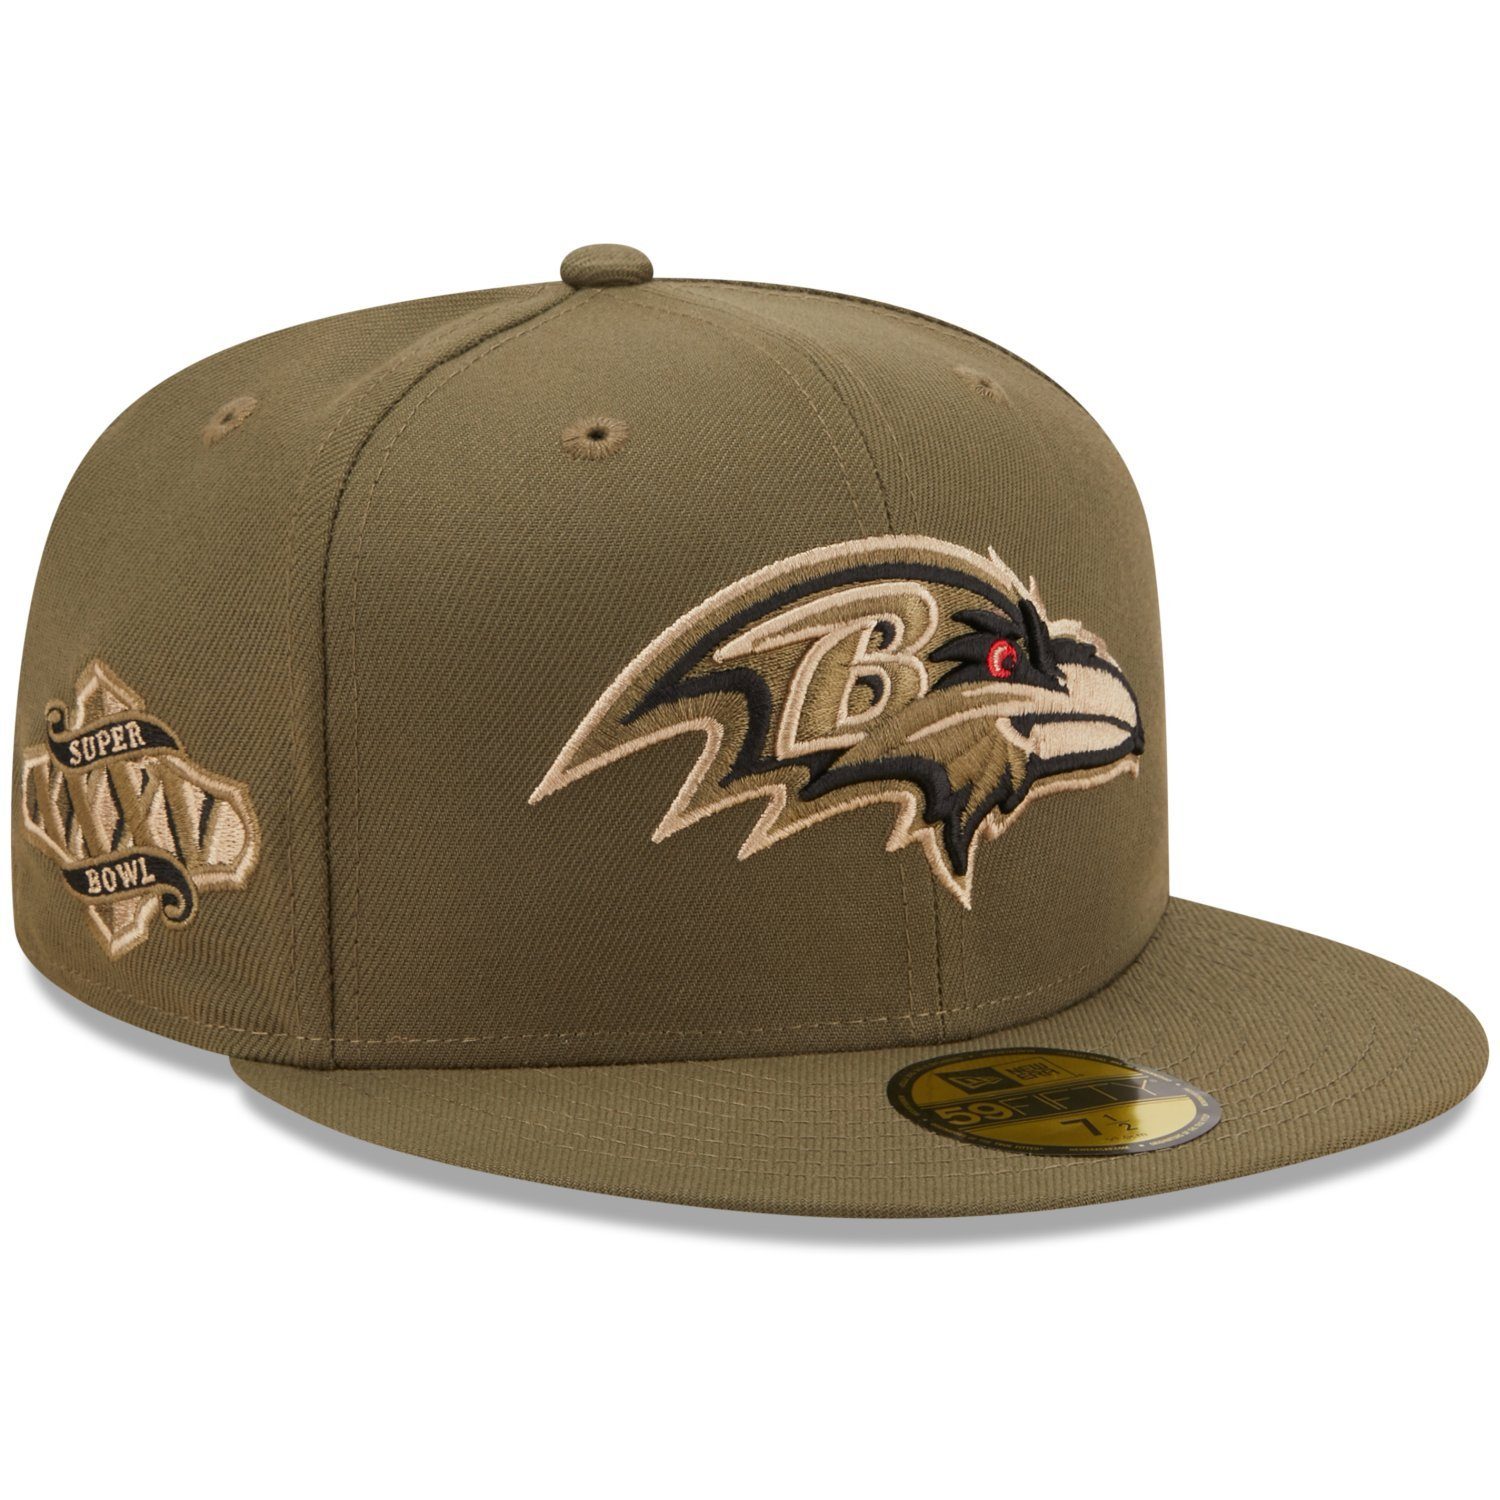 NFL Fitted Throwback ProBowl Superbowl New Baltimore Cap Ravens Era 59Fifty